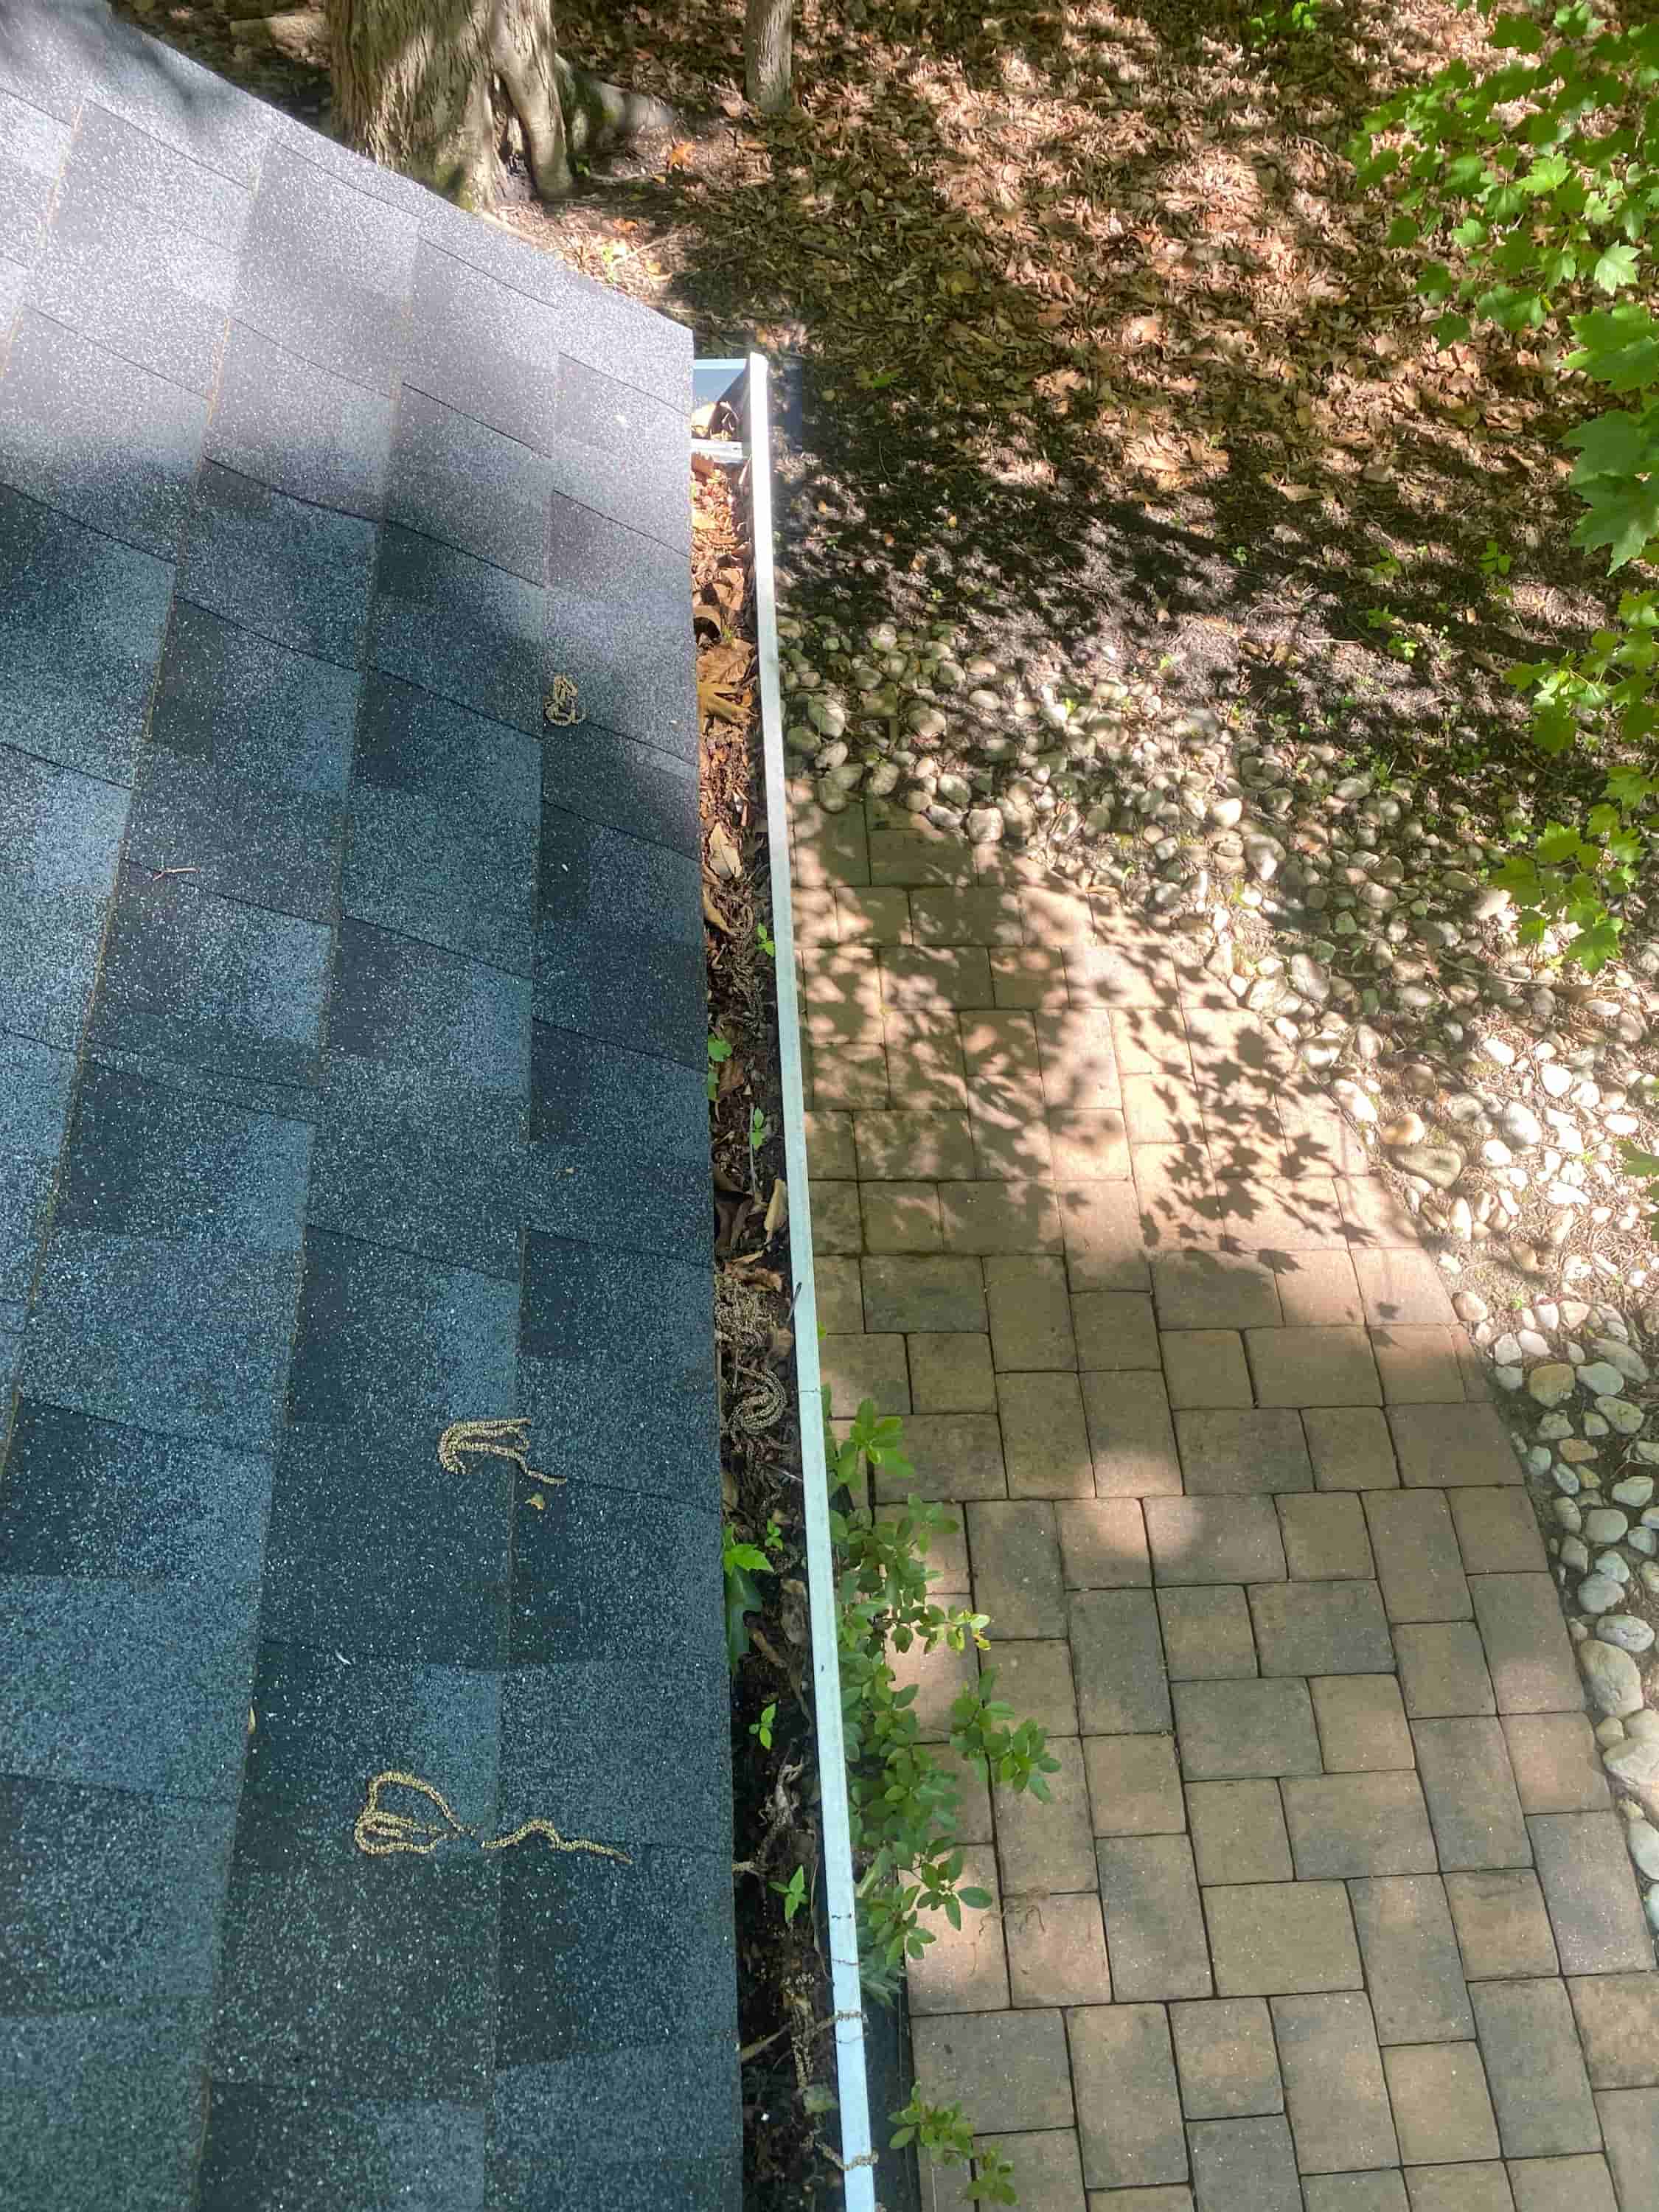 how often should gutters be cleaned